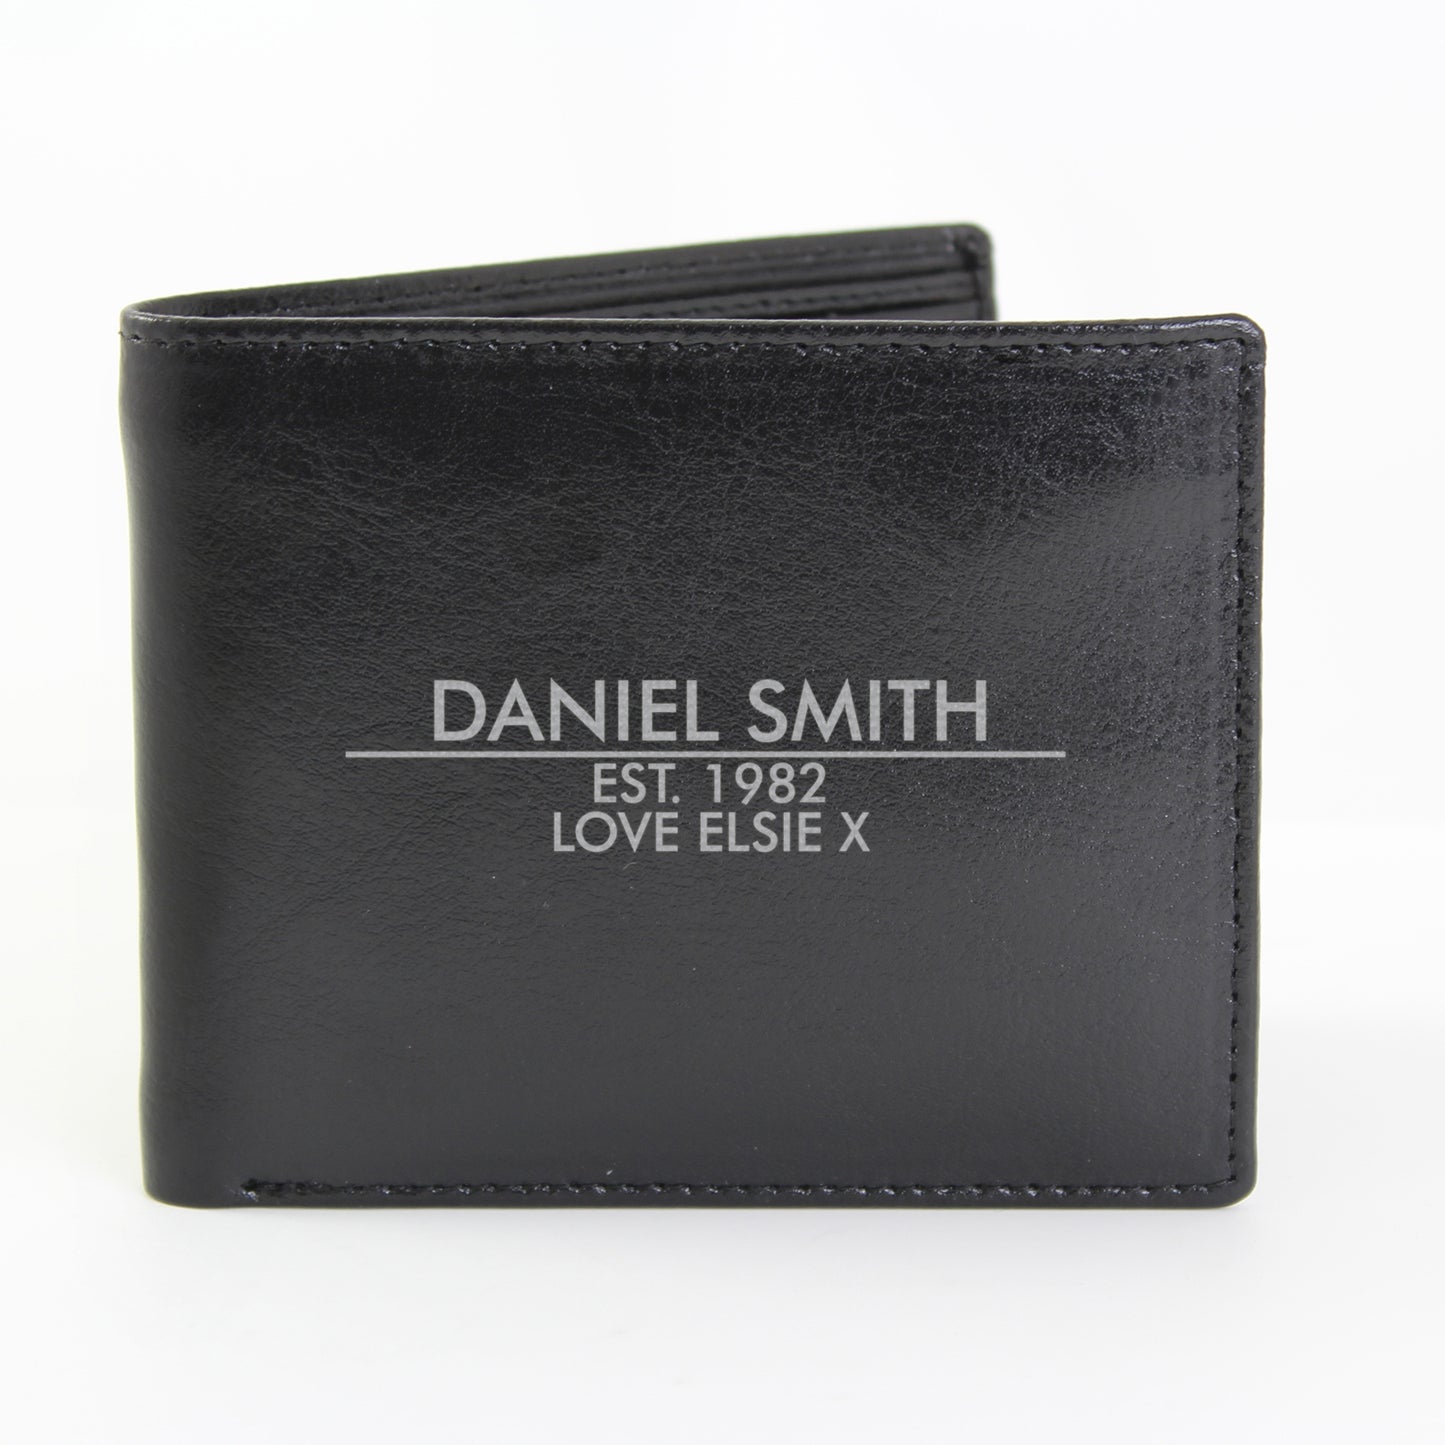 Personalised Classic Leather Wallet - Personalise It!